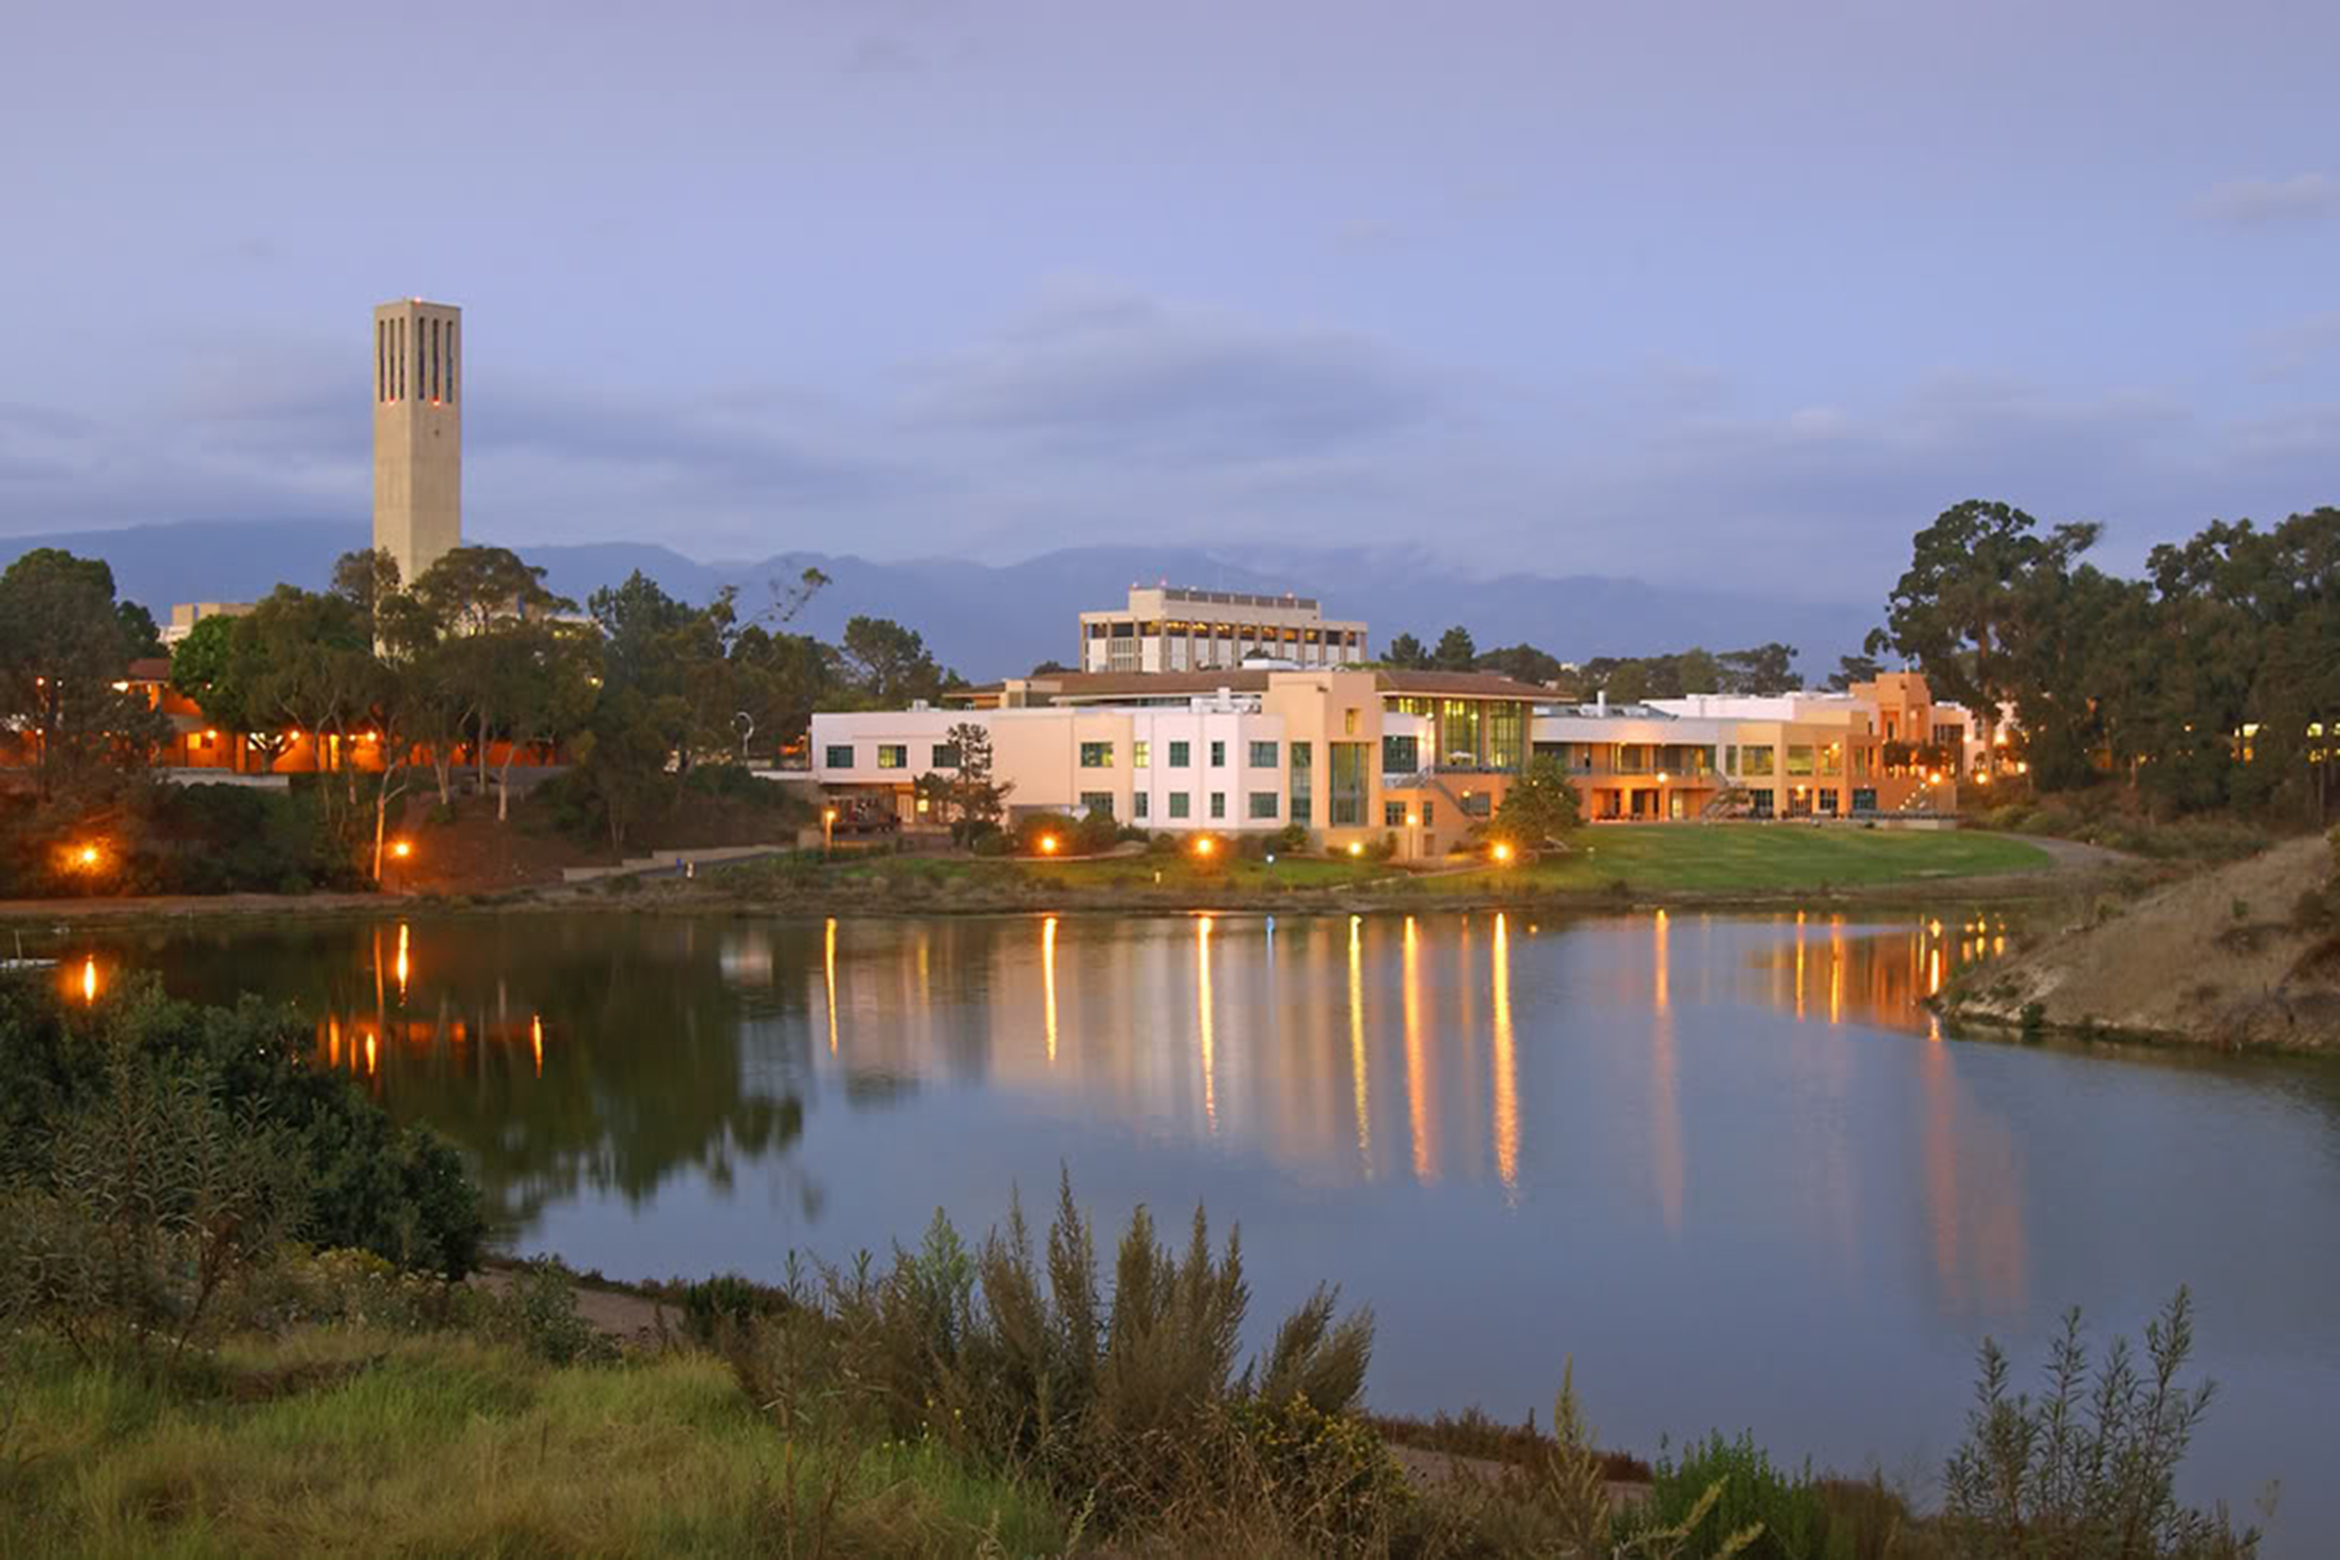 Exterior of UCen from campus lagoon